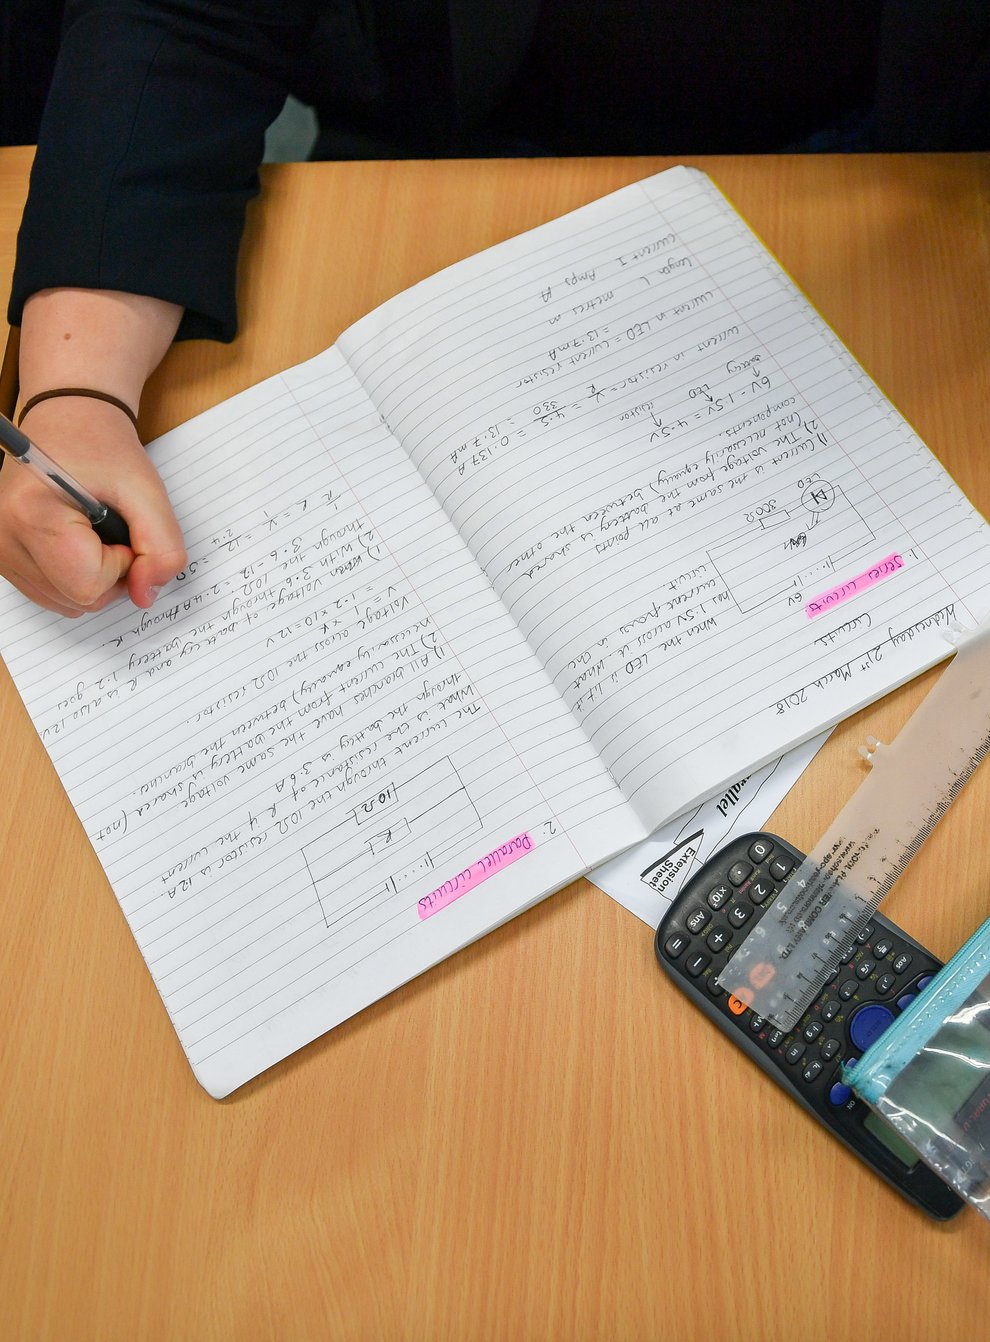 Students write in their exercise books